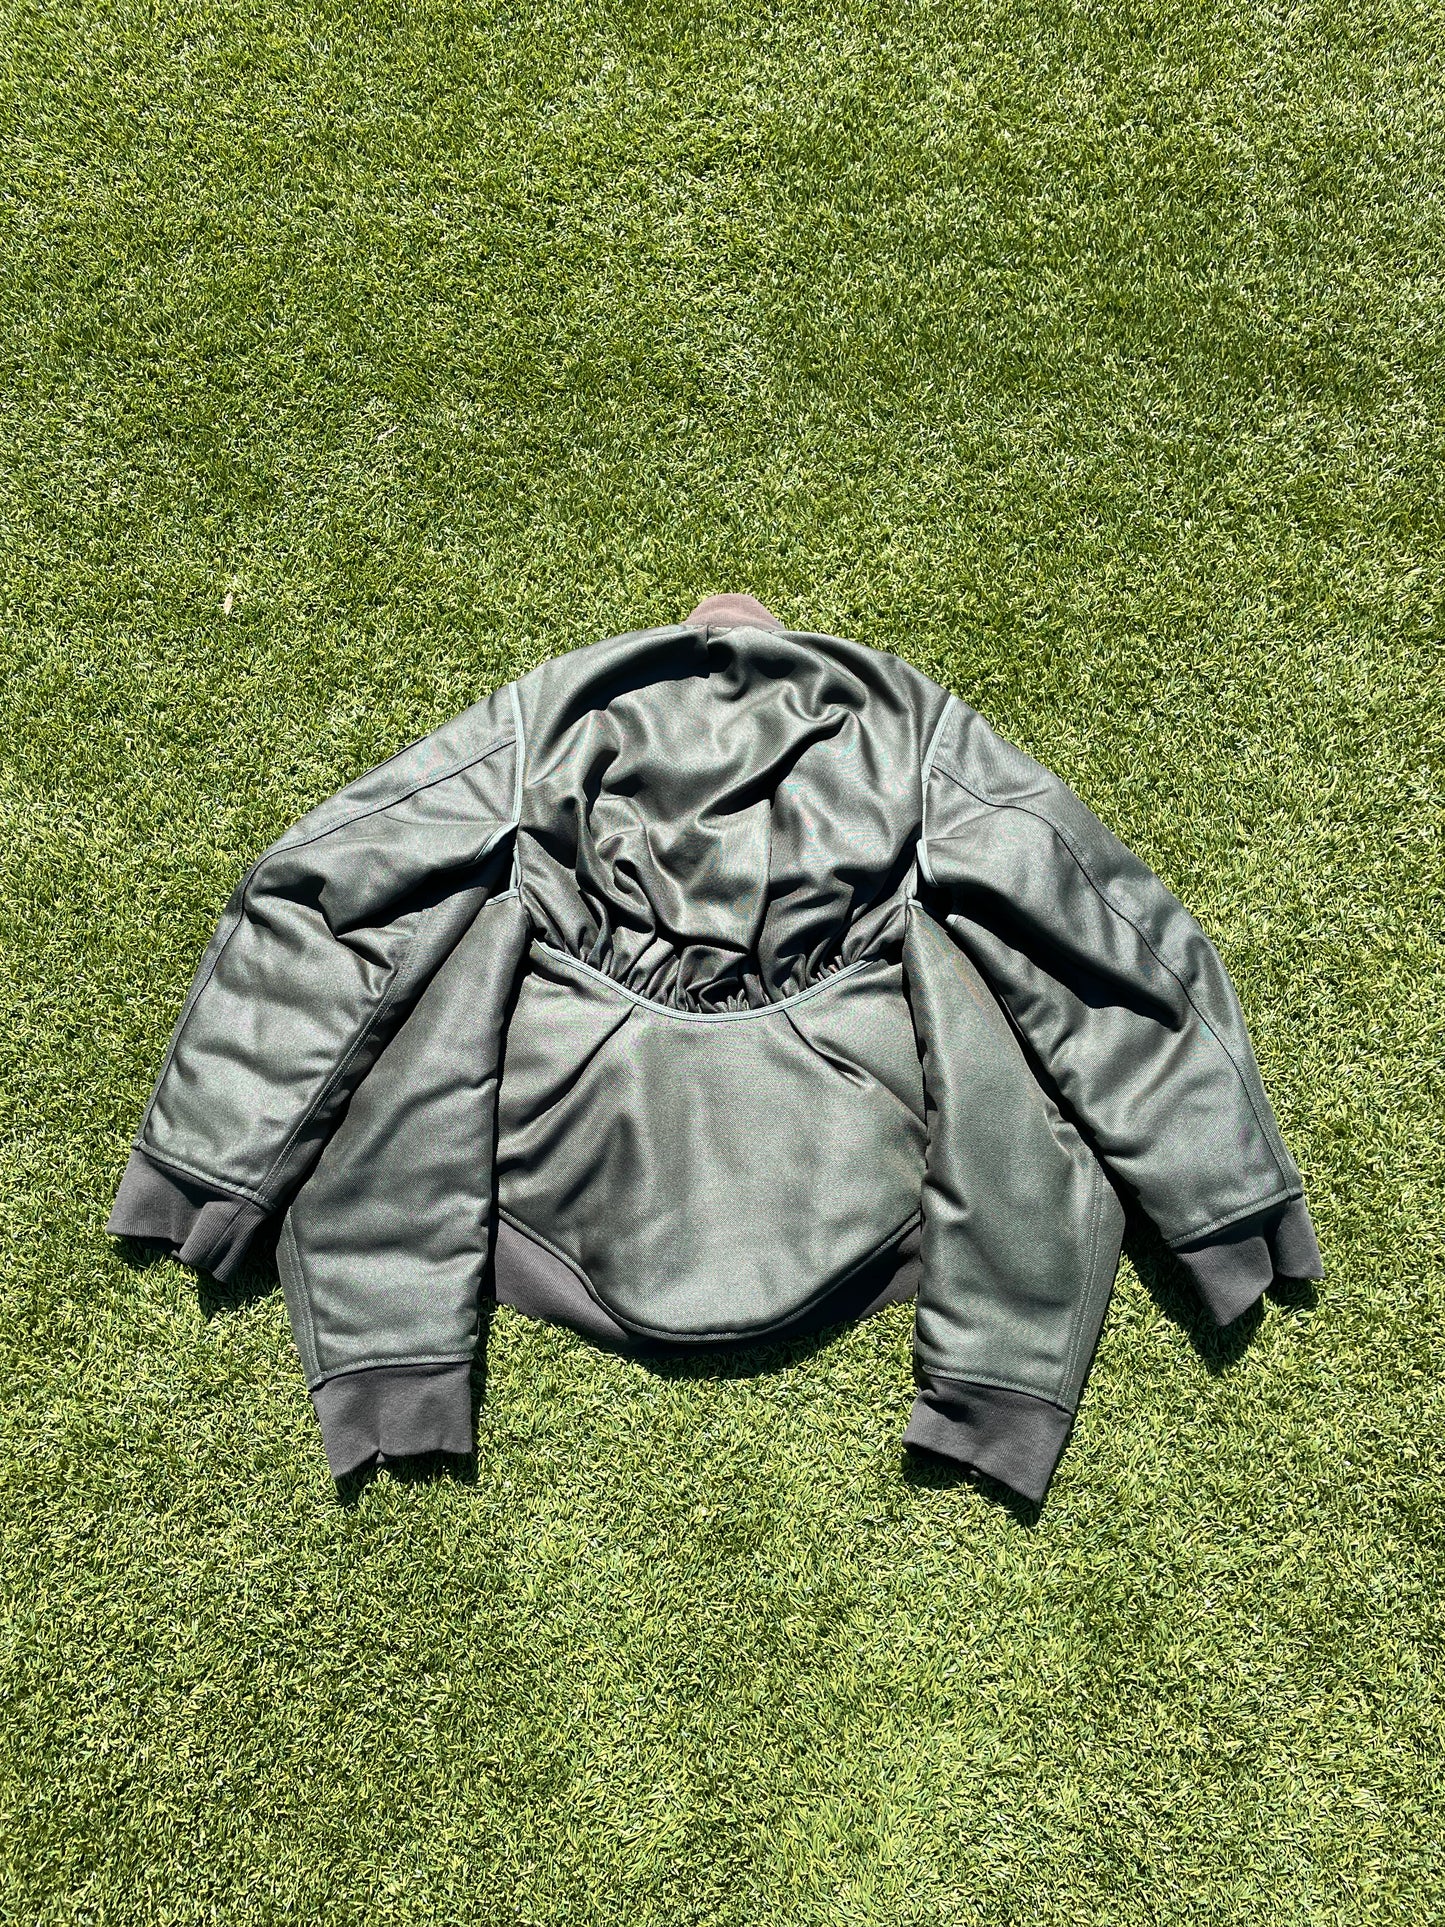 SS18 Helmut Lang By Shayne Oliver Four Arm MA-1 Bomber Jacket